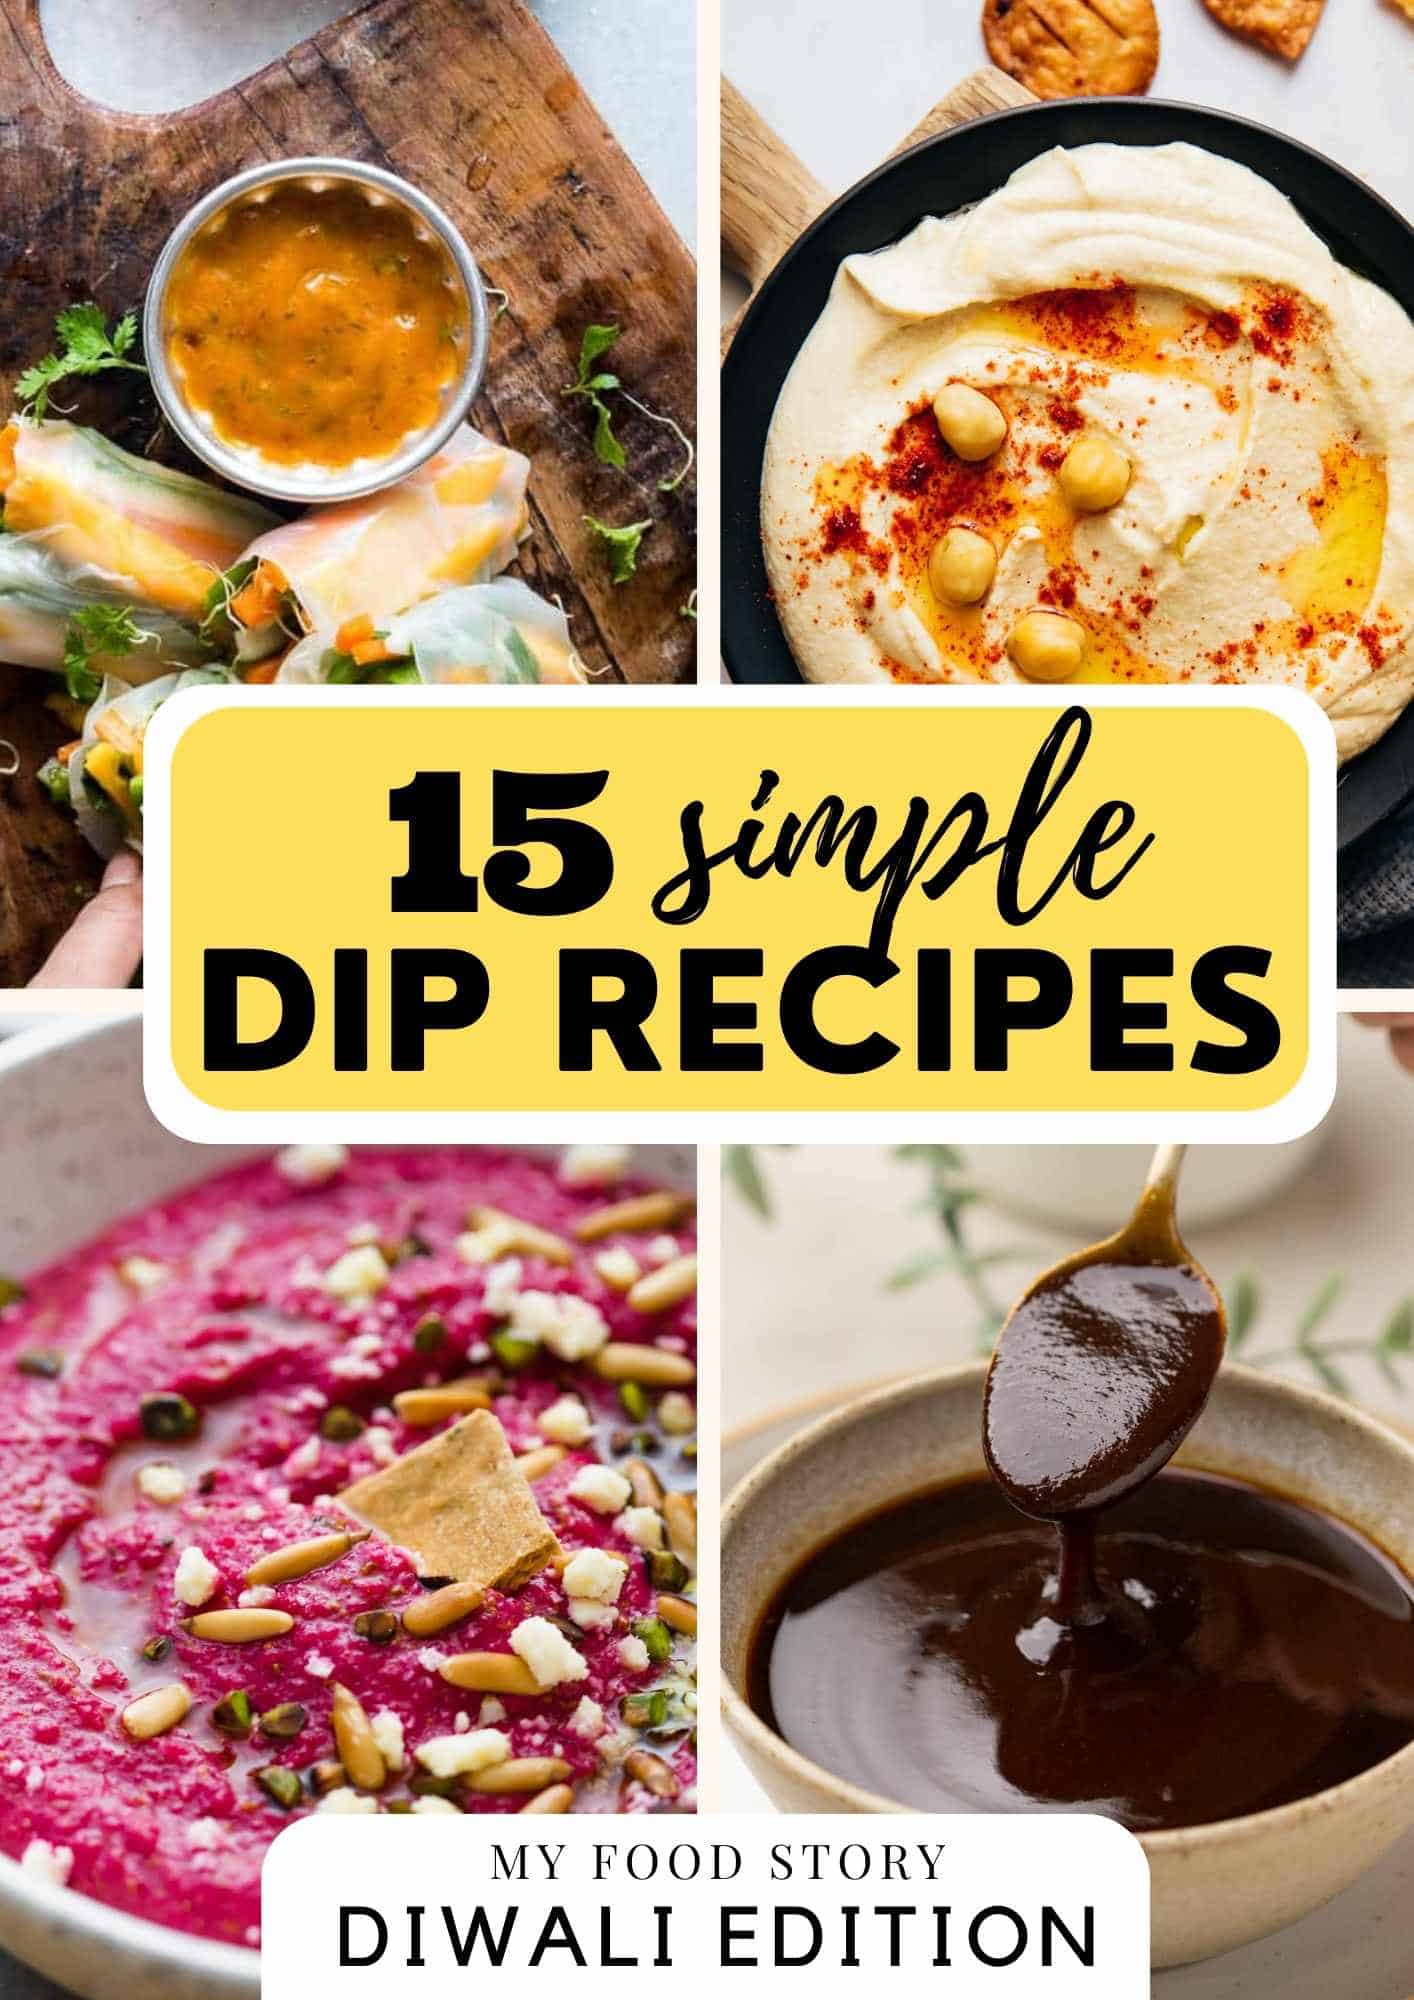 Picture collage showing four dip recipes photographs with text overlay